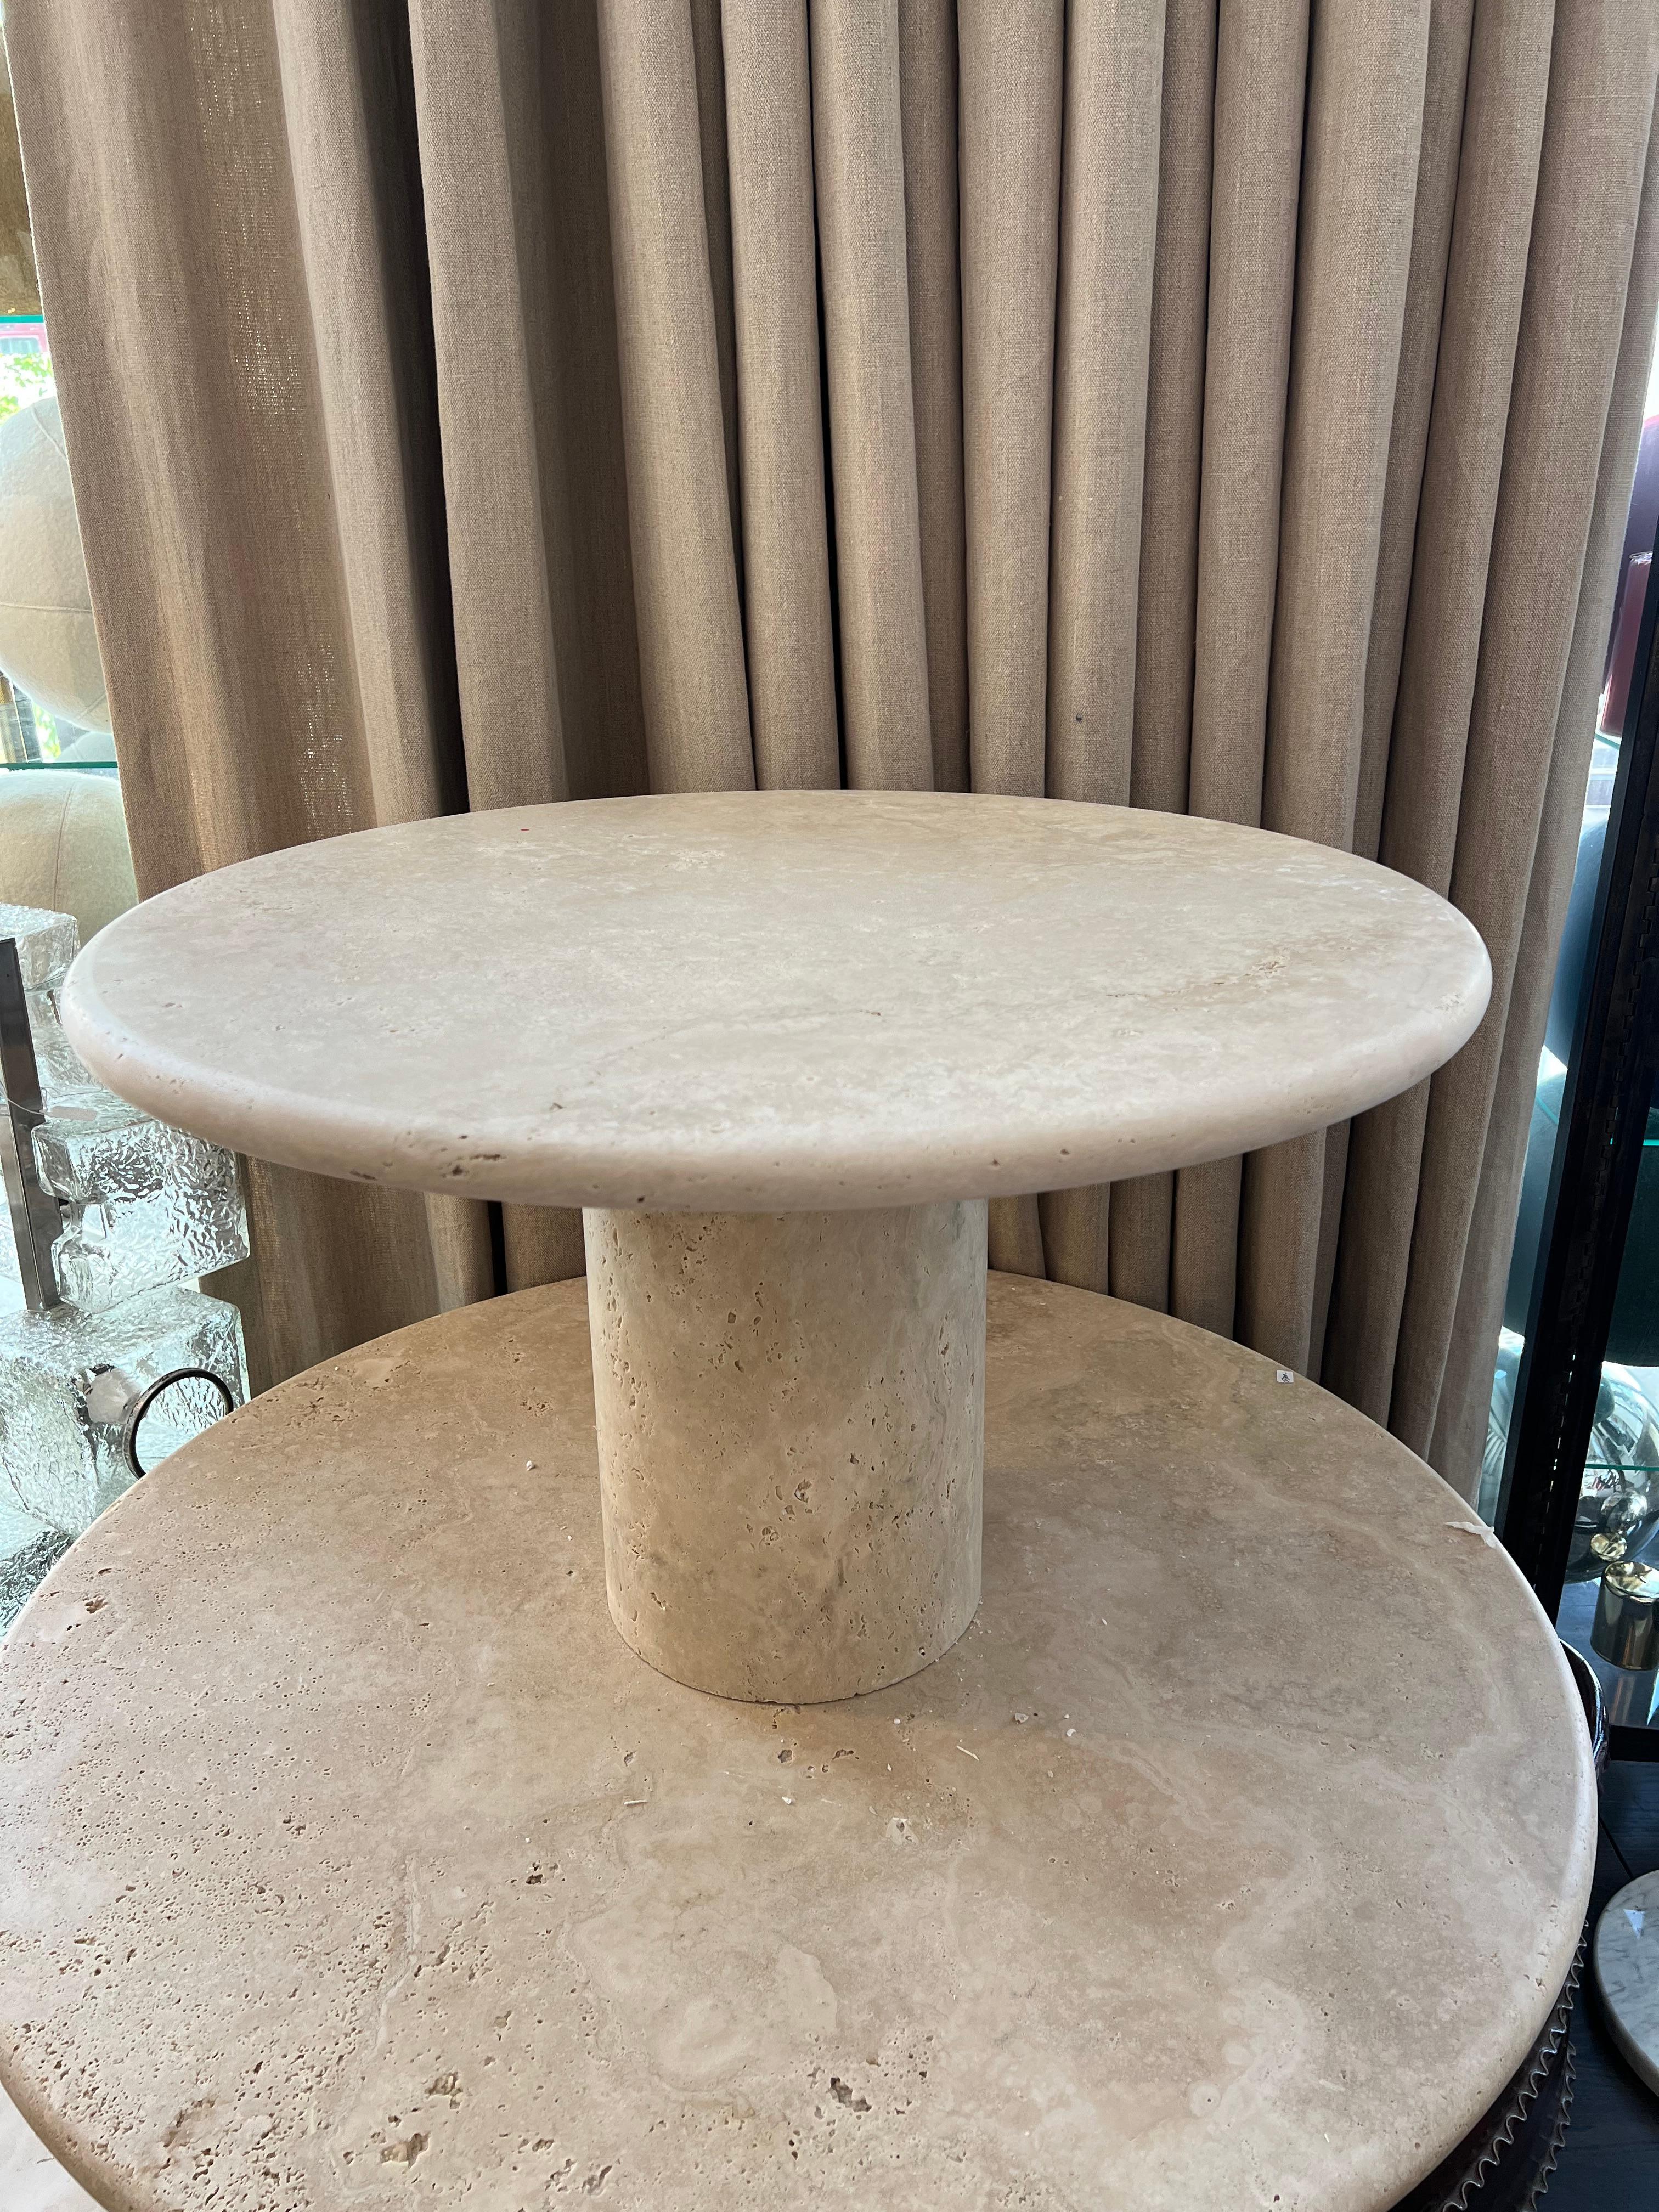 Round Roman travertine coffee table designed by Le Lampade
Available now. This table can be totally custom. 
Handmade in Italy with Italian Travertine.